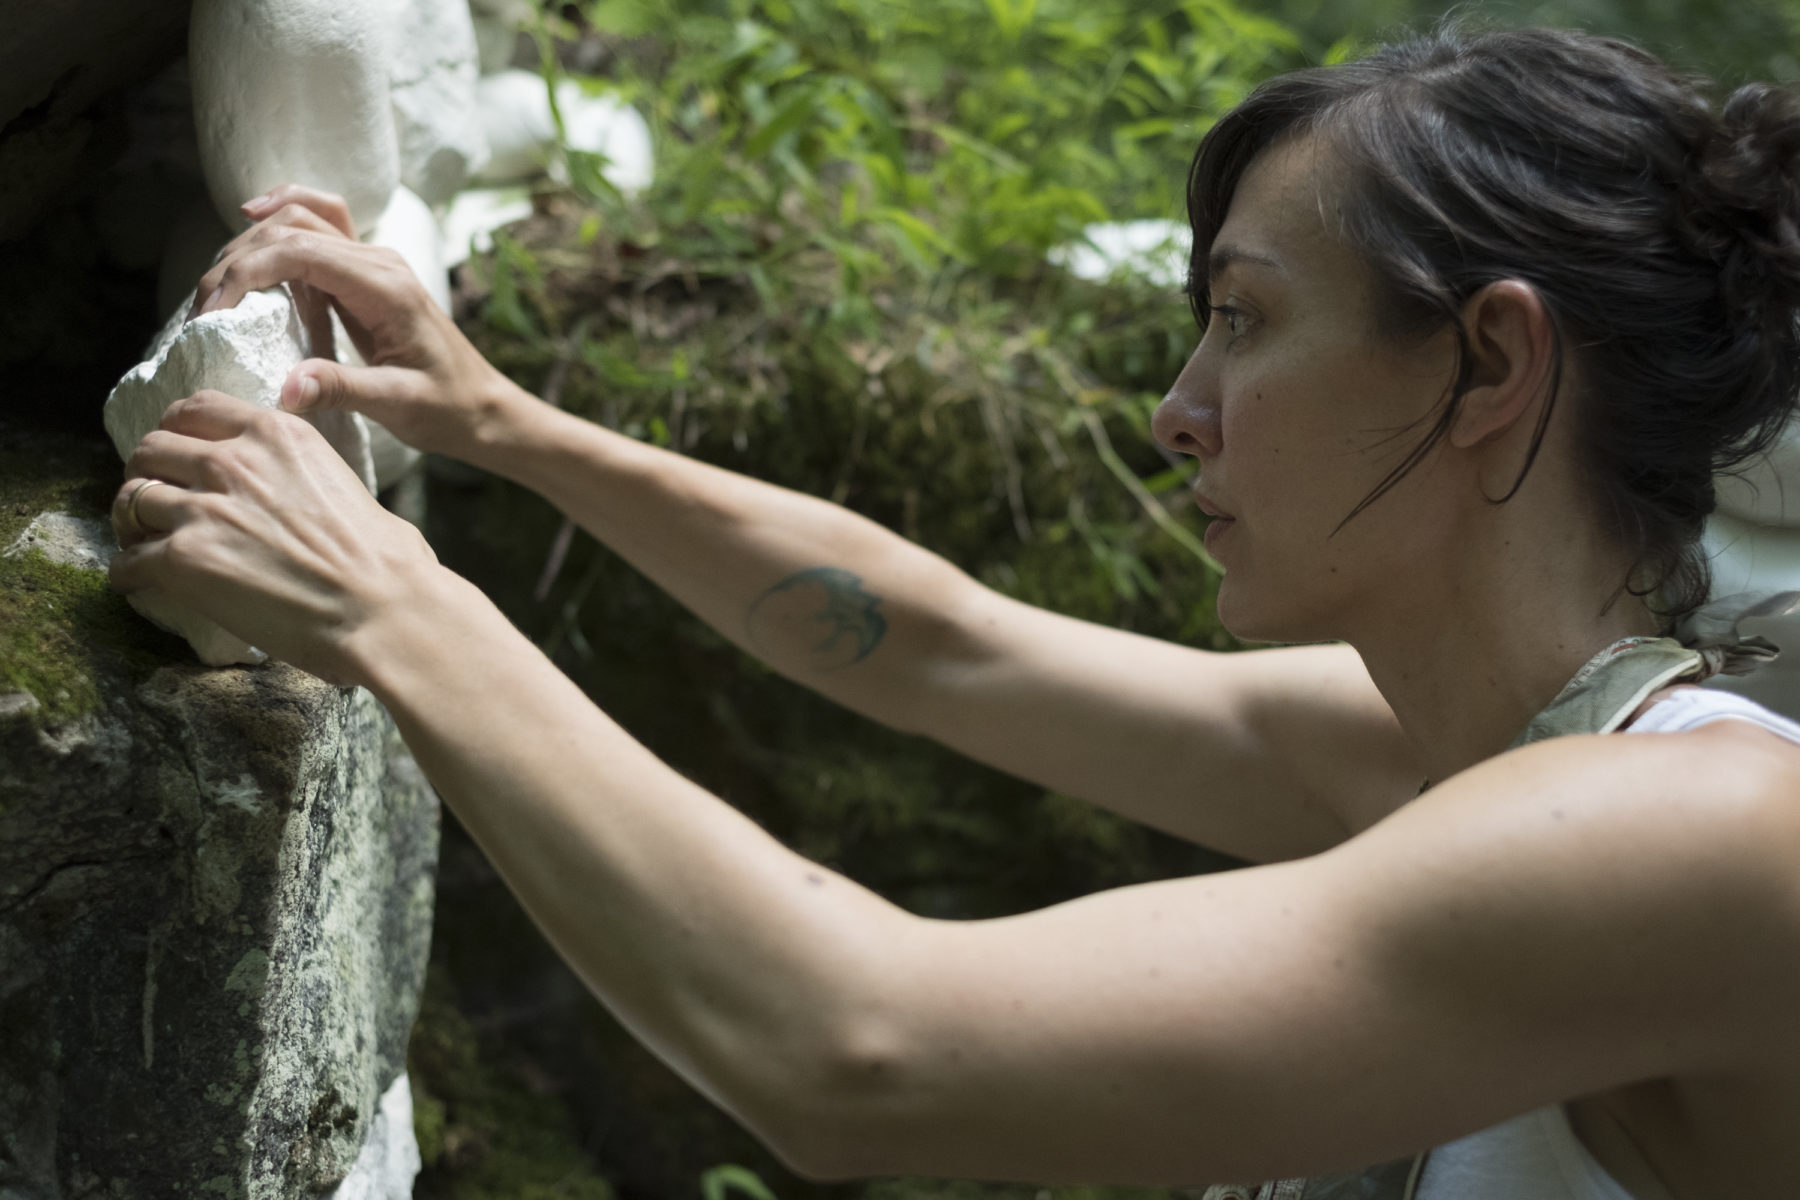 The artist in profile, Rachel, carefully places a porcelain rock on top on an existing rock